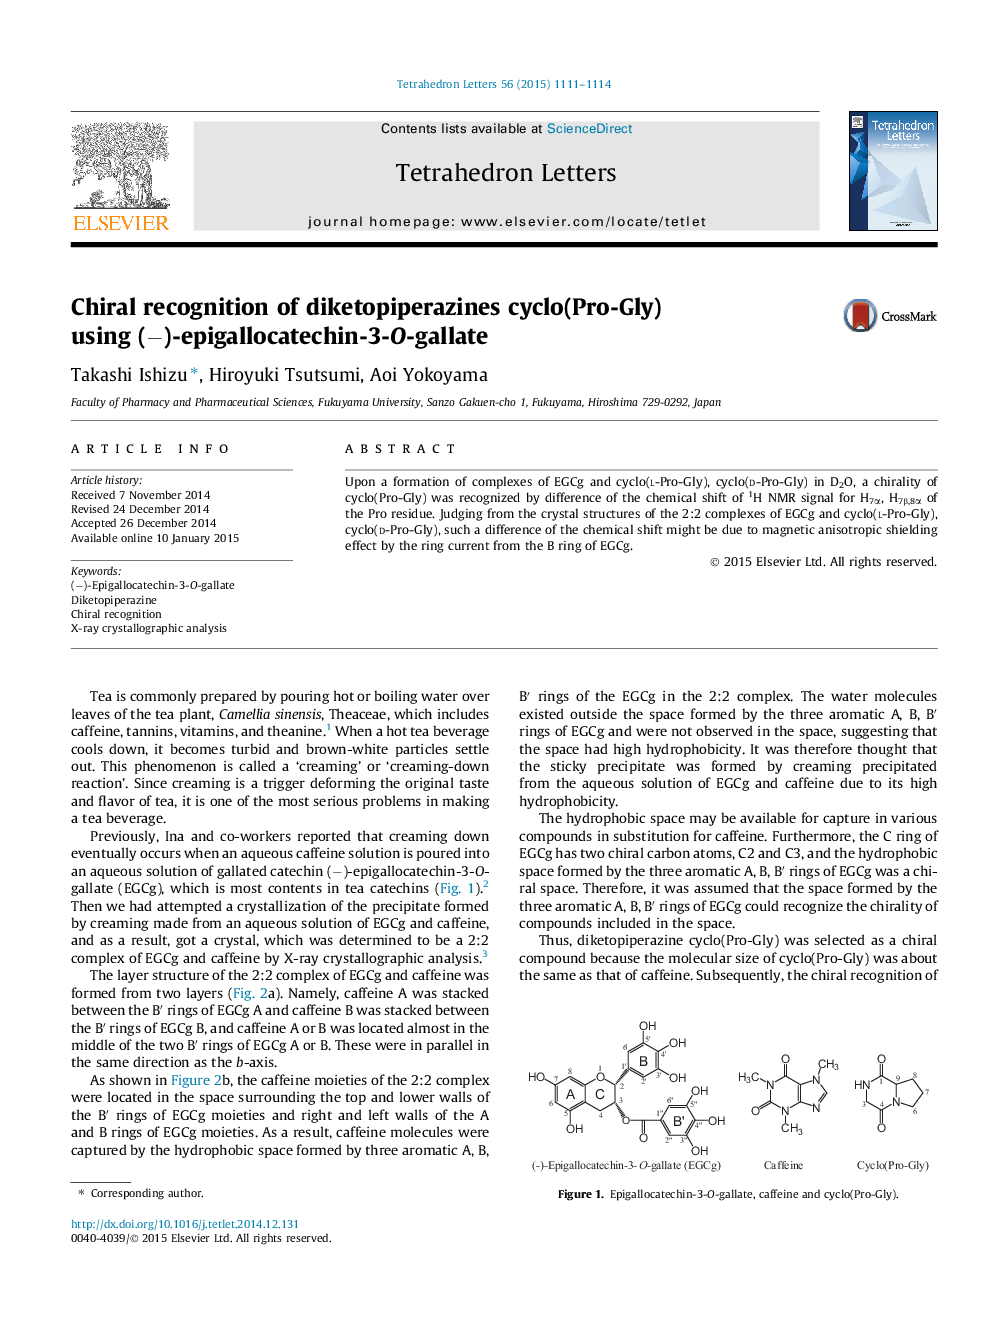 Chiral recognition of diketopiperazines cyclo(Pro-Gly) using (â)-epigallocatechin-3-O-gallate